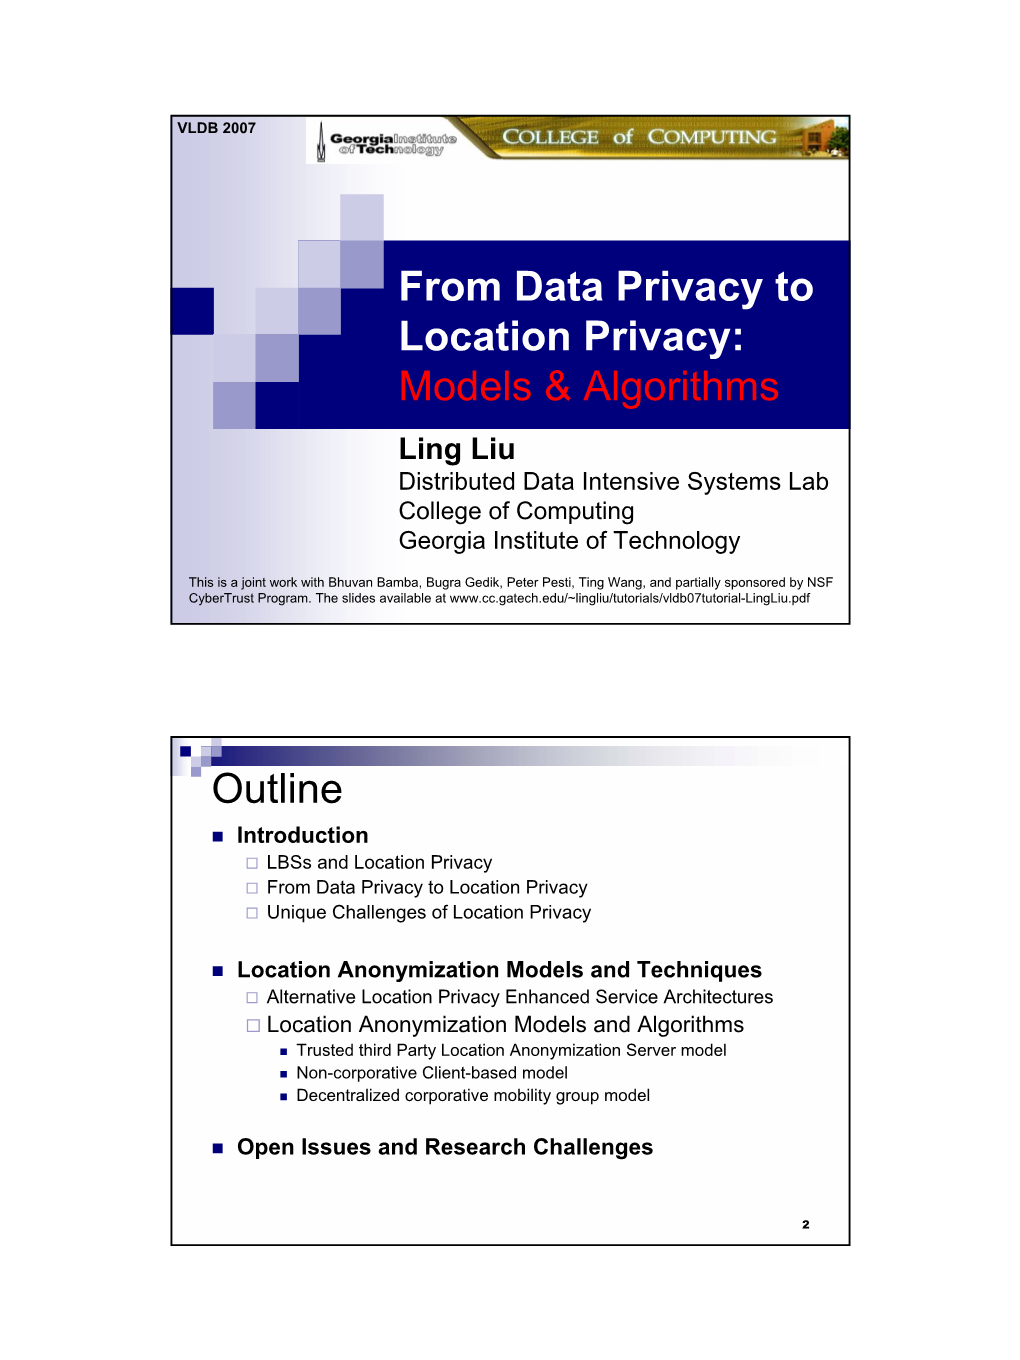 From Data Privacy to Location Privacy: Models & Algorithms Outline